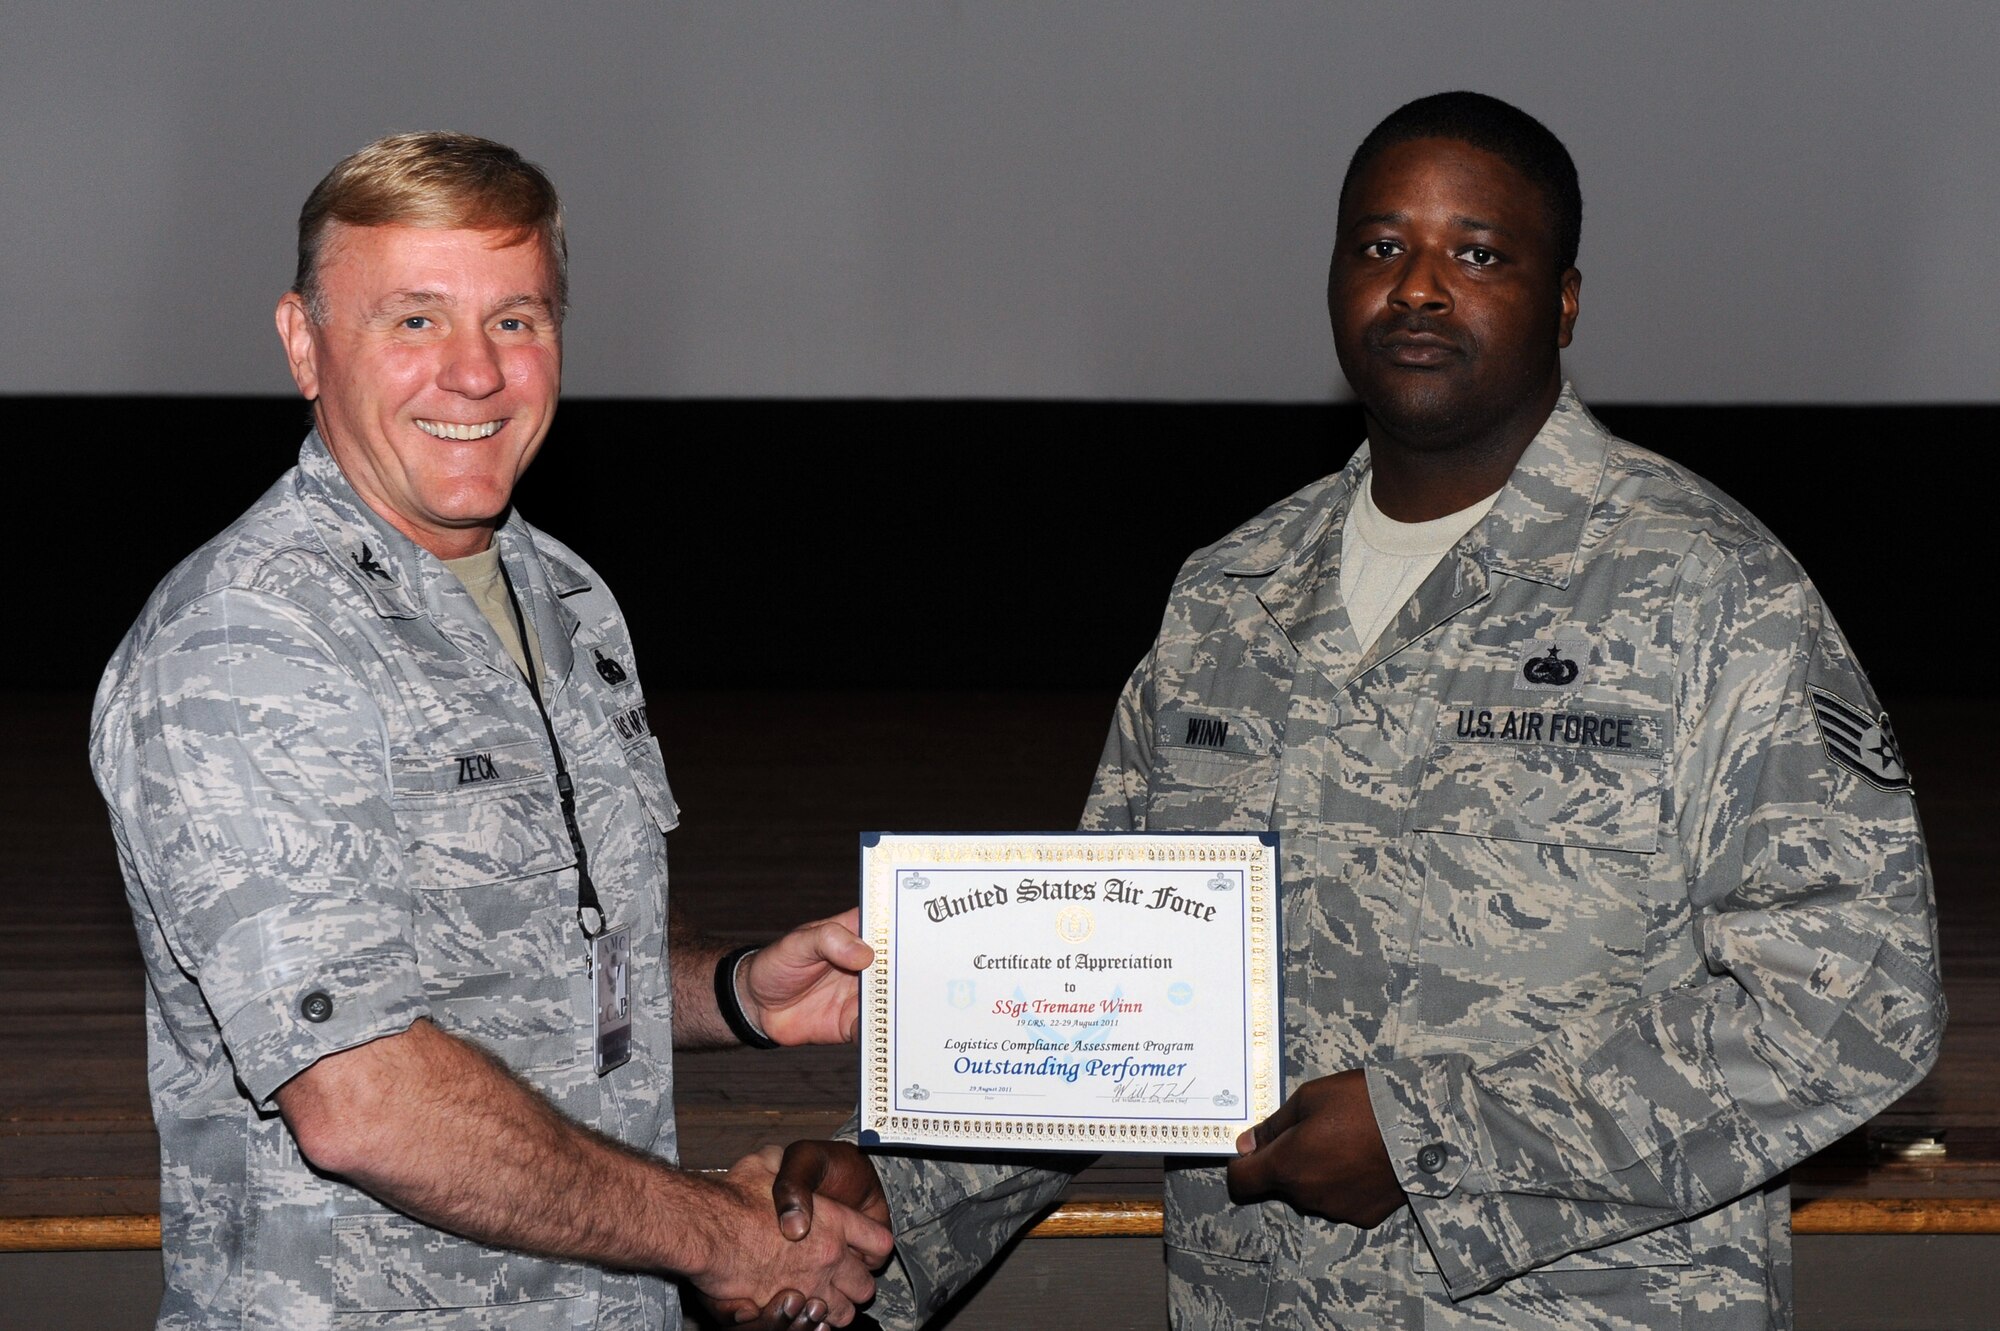 Col. William “Zack” Zeck, Air Mobility Command A4T division chief, presents an award to Staff Sgt. Tremane Winn, a 19th Logistics Readiness Squadron NCO in charge of inbound Aug. 29, 2011, at Little Rock Air Force Base, Ark.  Winn was one of many Airmen recognized for outstanding performance during the Logistics Compliance Assessment Program. (U.S. Air Force photo by Airman 1st Class Rusty Frank) 